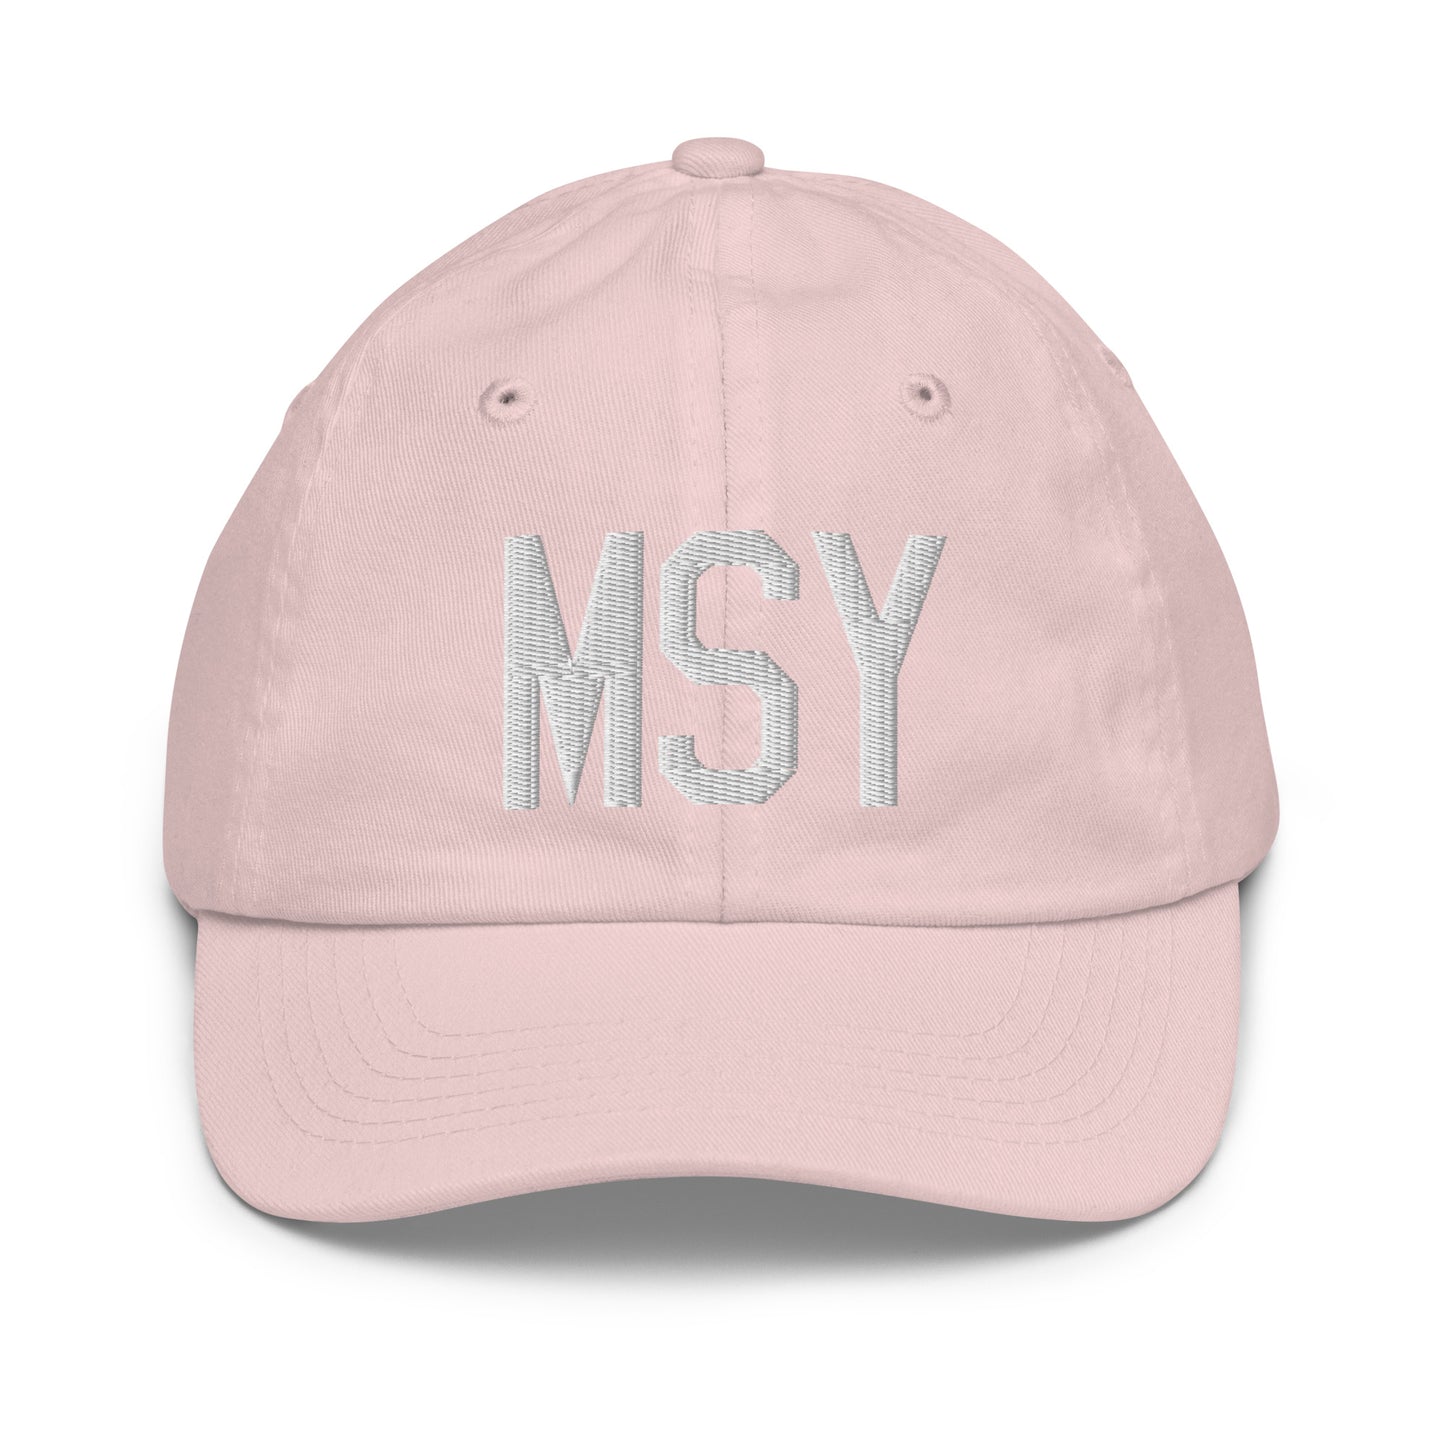 Airport Code Kid's Baseball Cap - White • MSY New Orleans • YHM Designs - Image 31